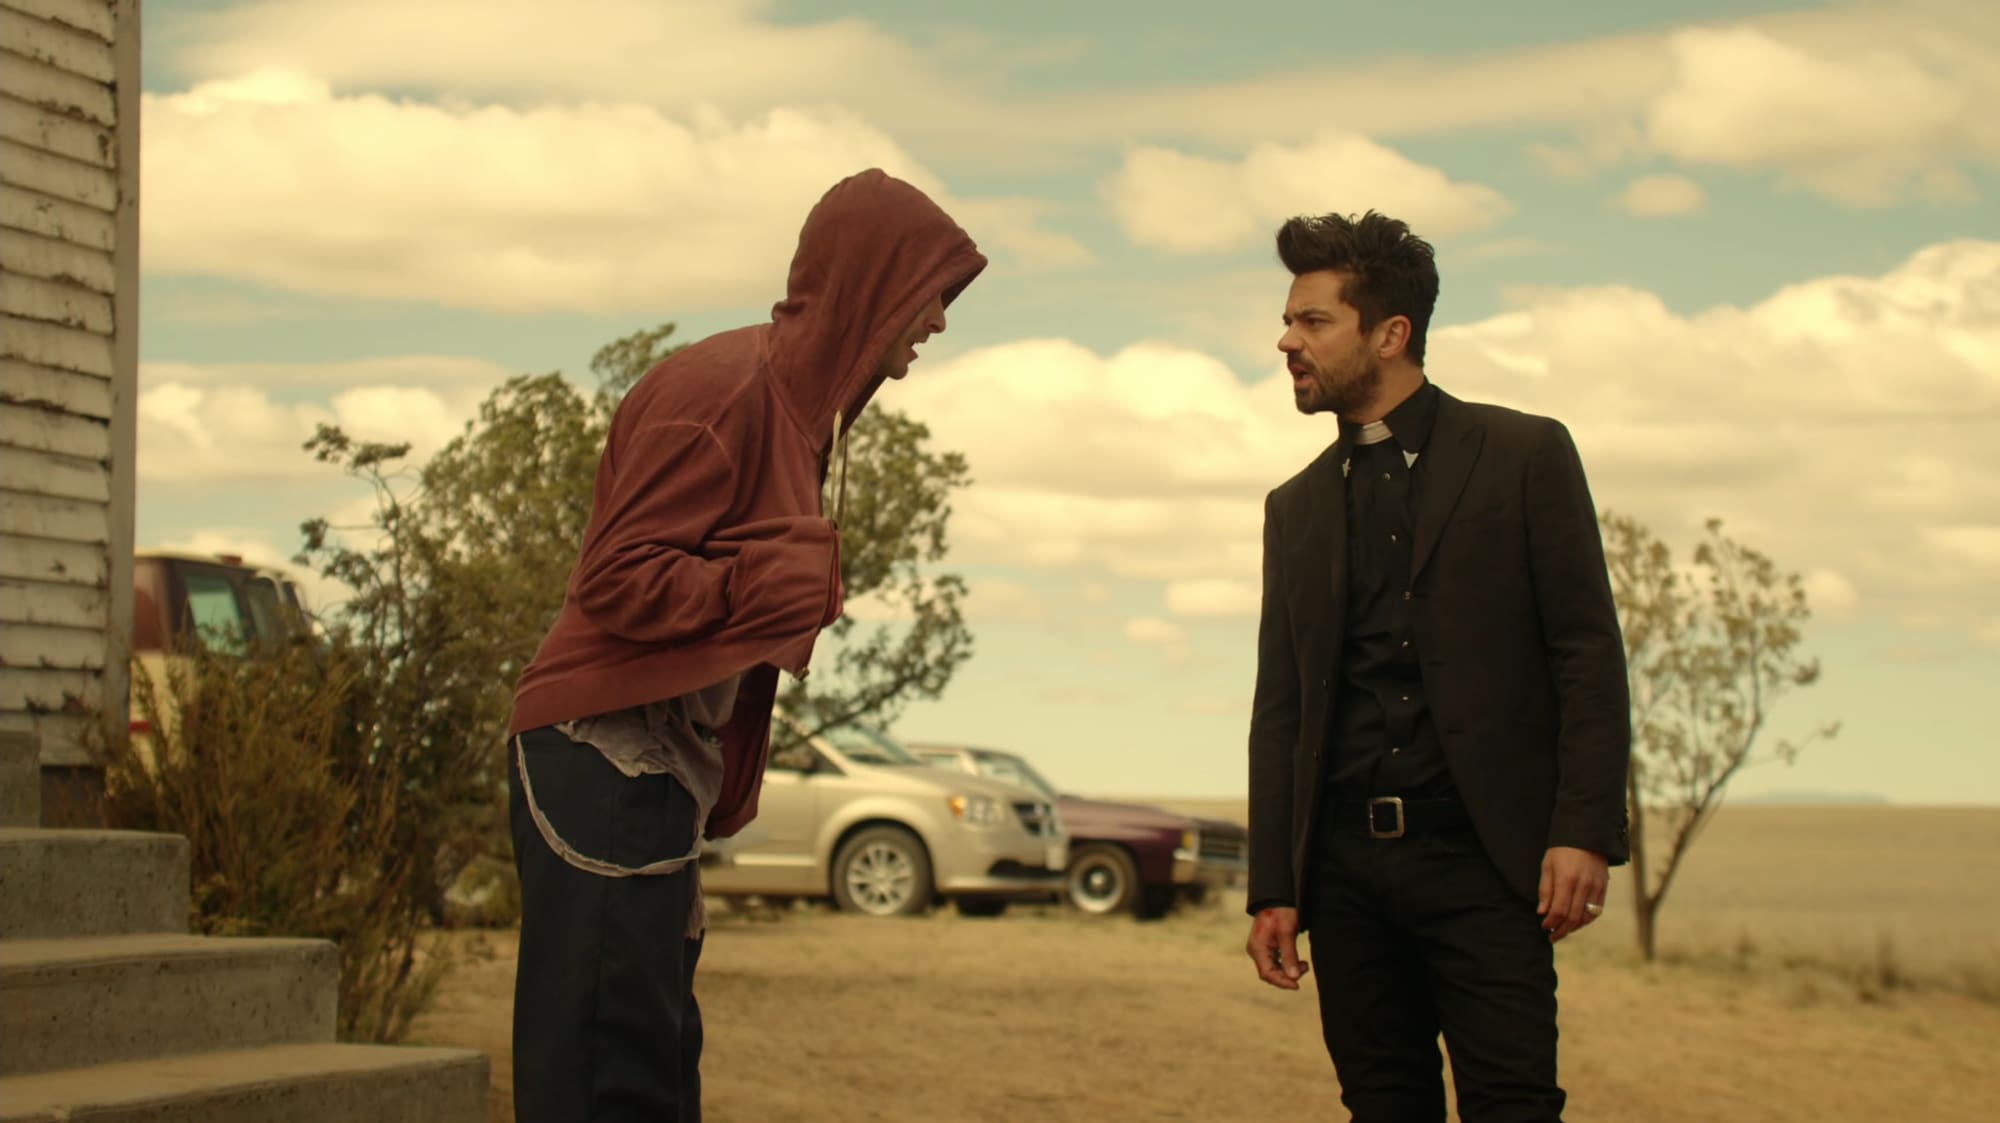 5-awesome-things-you-might-have-missed-from-season-1-episode-7-of-preacher-cassidy-app-1054970.jpg